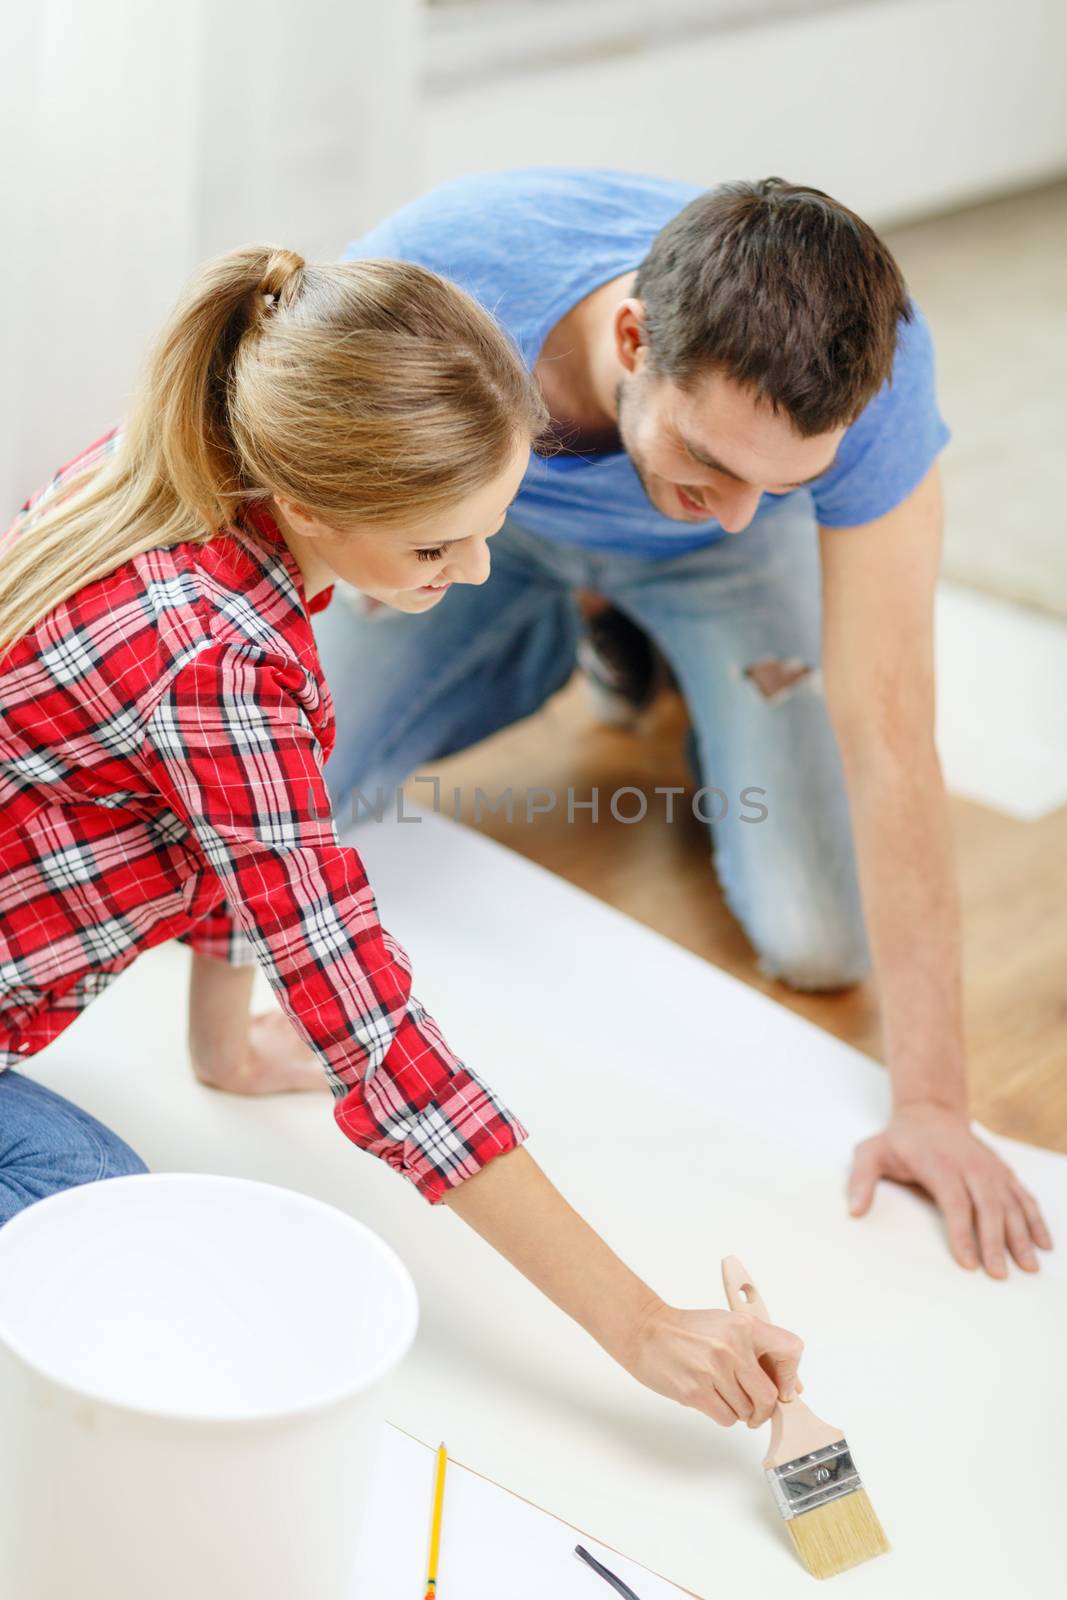 smiling couple smearing wallpaper with glue by dolgachov